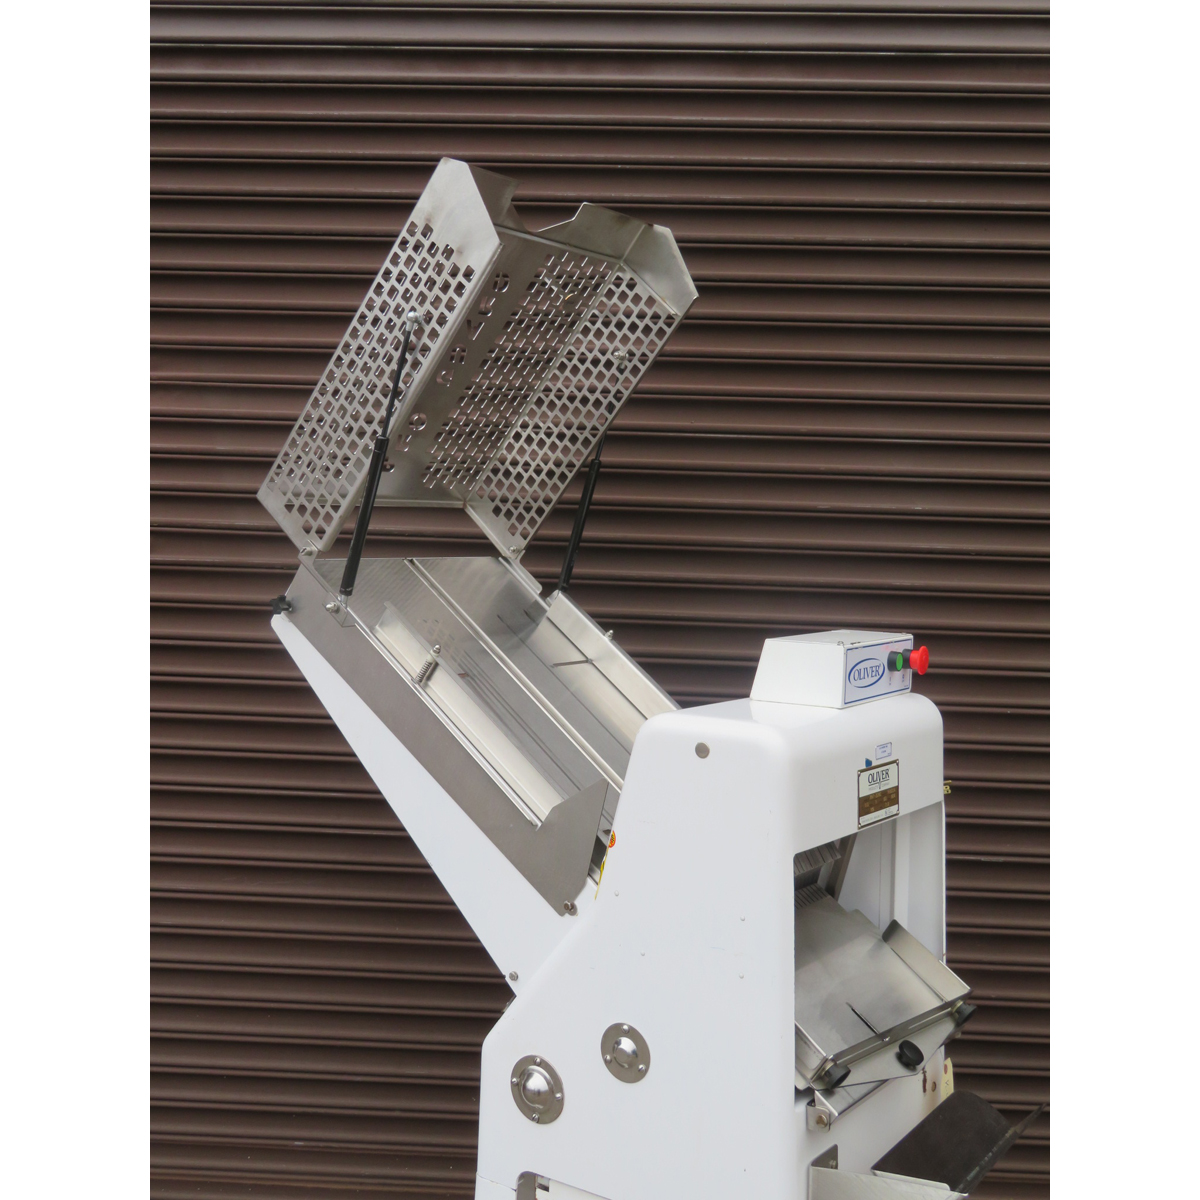 Oliver 797-32NC Bread Slicer, 1/2" Cut, New Blades, Used Excellent Condition image 2